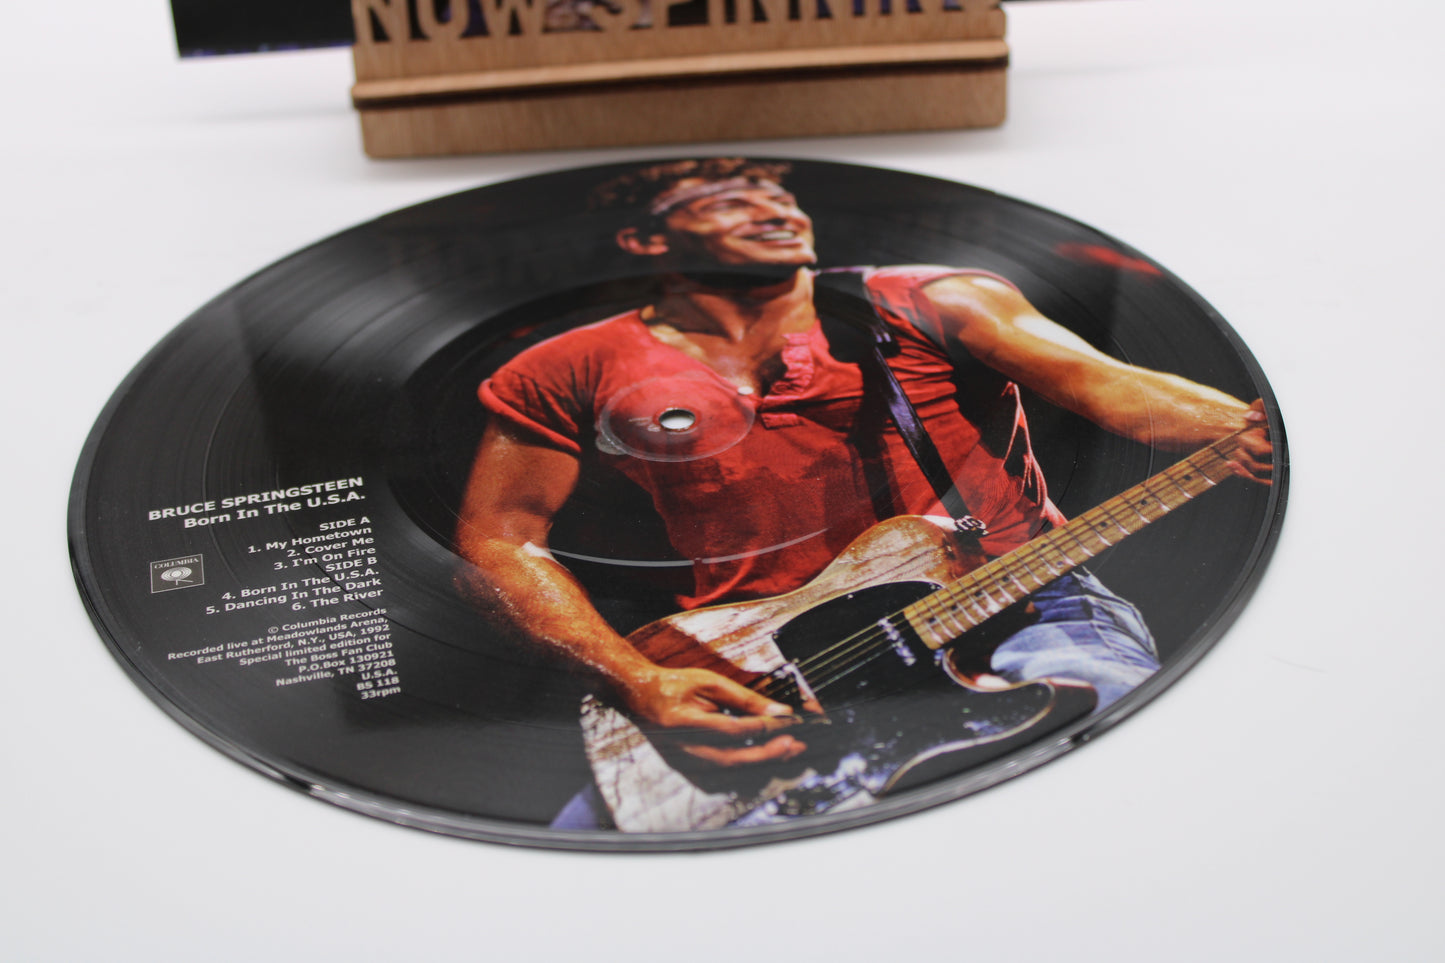 Bruce Springsteen - Born In The USA - 10" Picture Vinyl Ltd. Edition #100/250 Columbia 1992